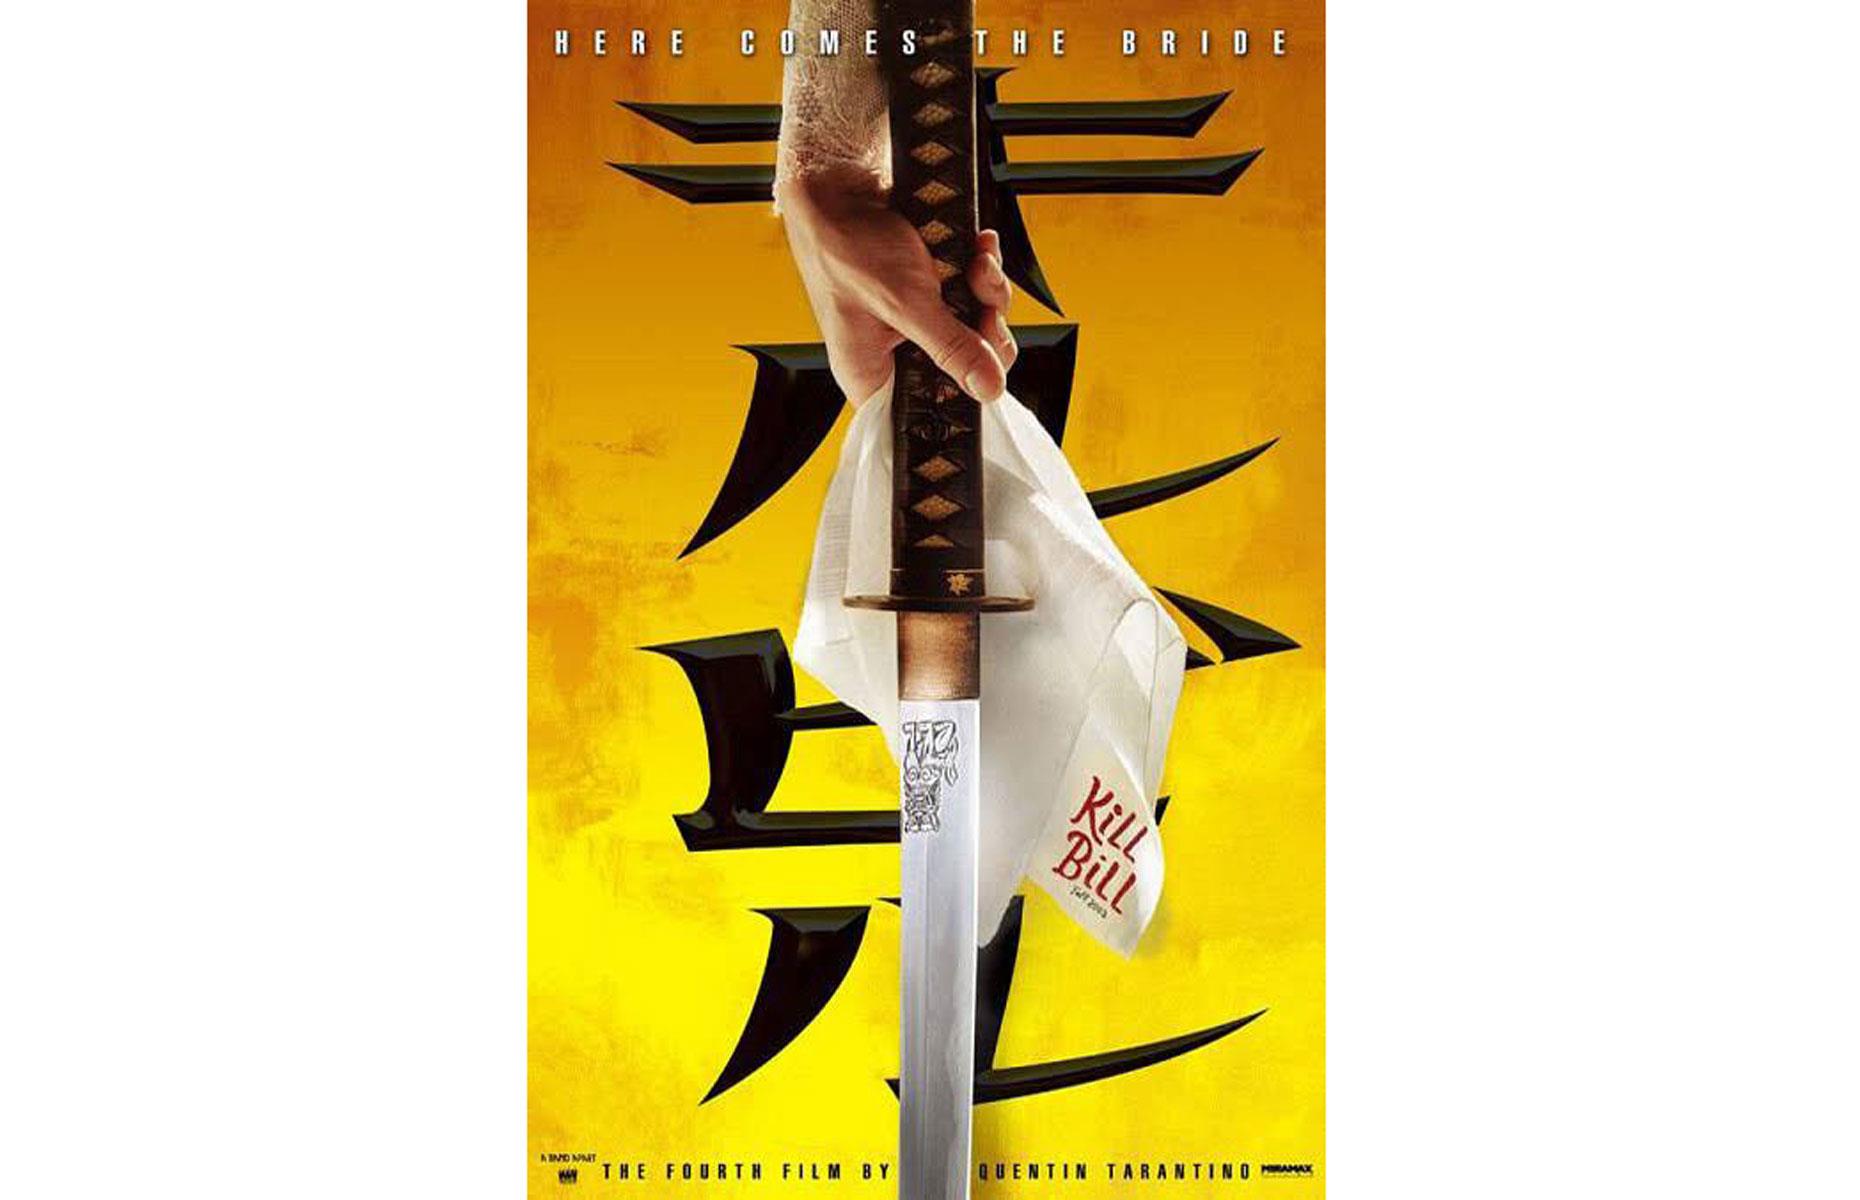 Kill Bill: Volume 1 (American poster, 2003): up to $150 (£110)